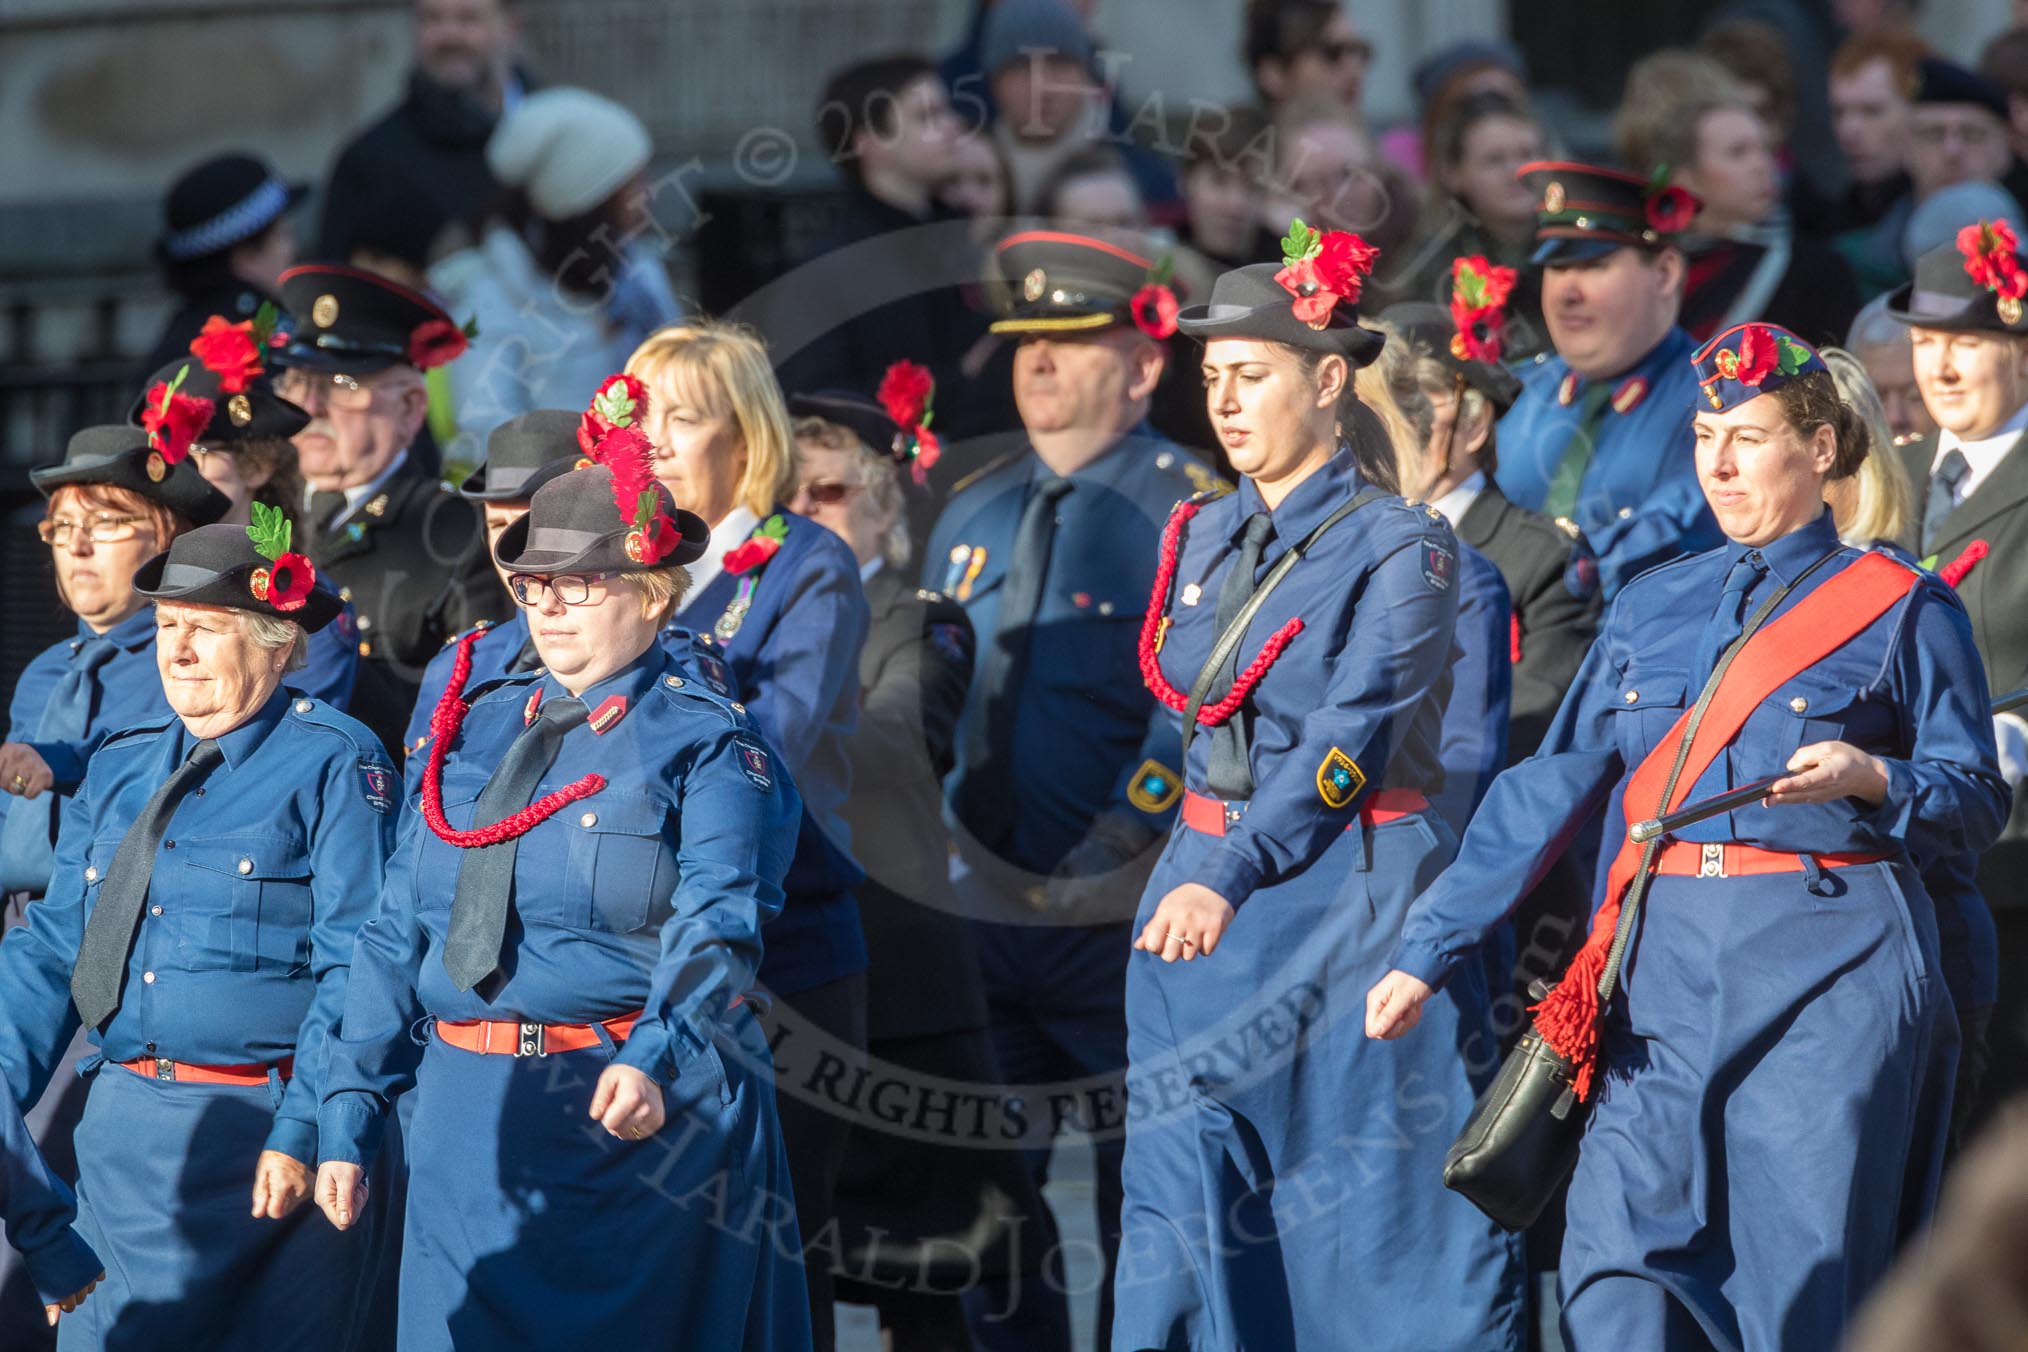 March Past, Remembrance Sunday at the Cenotaph 2016: M36 Church Lads & Church Girls Brigade.
Cenotaph, Whitehall, London SW1,
London,
Greater London,
United Kingdom,
on 13 November 2016 at 13:19, image #2894